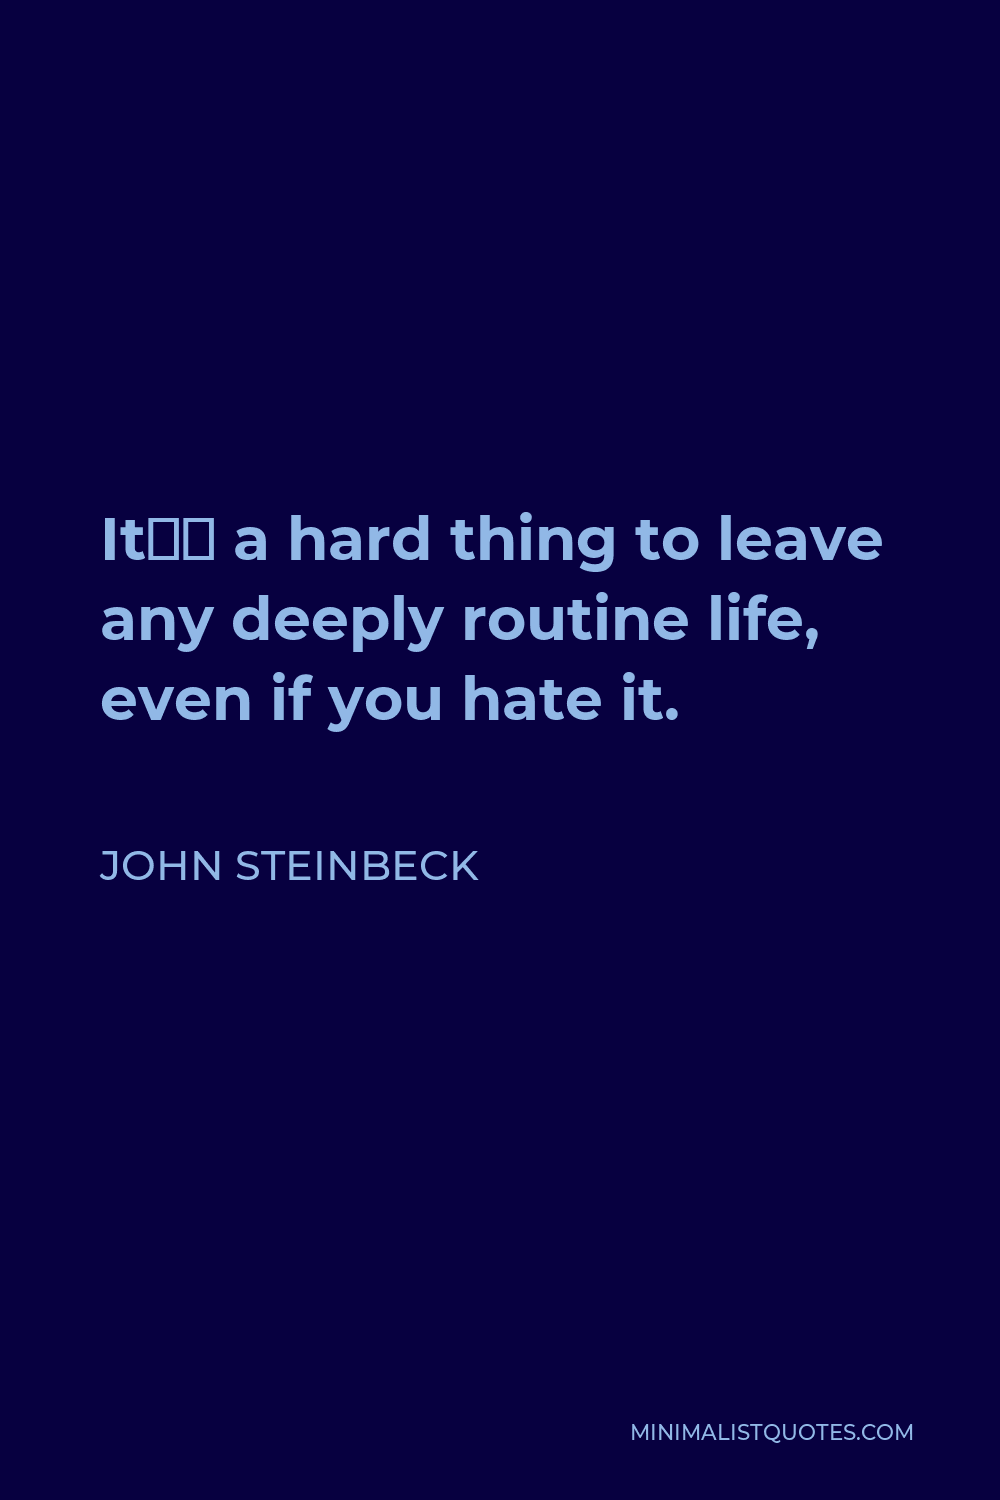 John Steinbeck Quote - It’s a hard thing to leave any deeply routine life, even if you hate it.